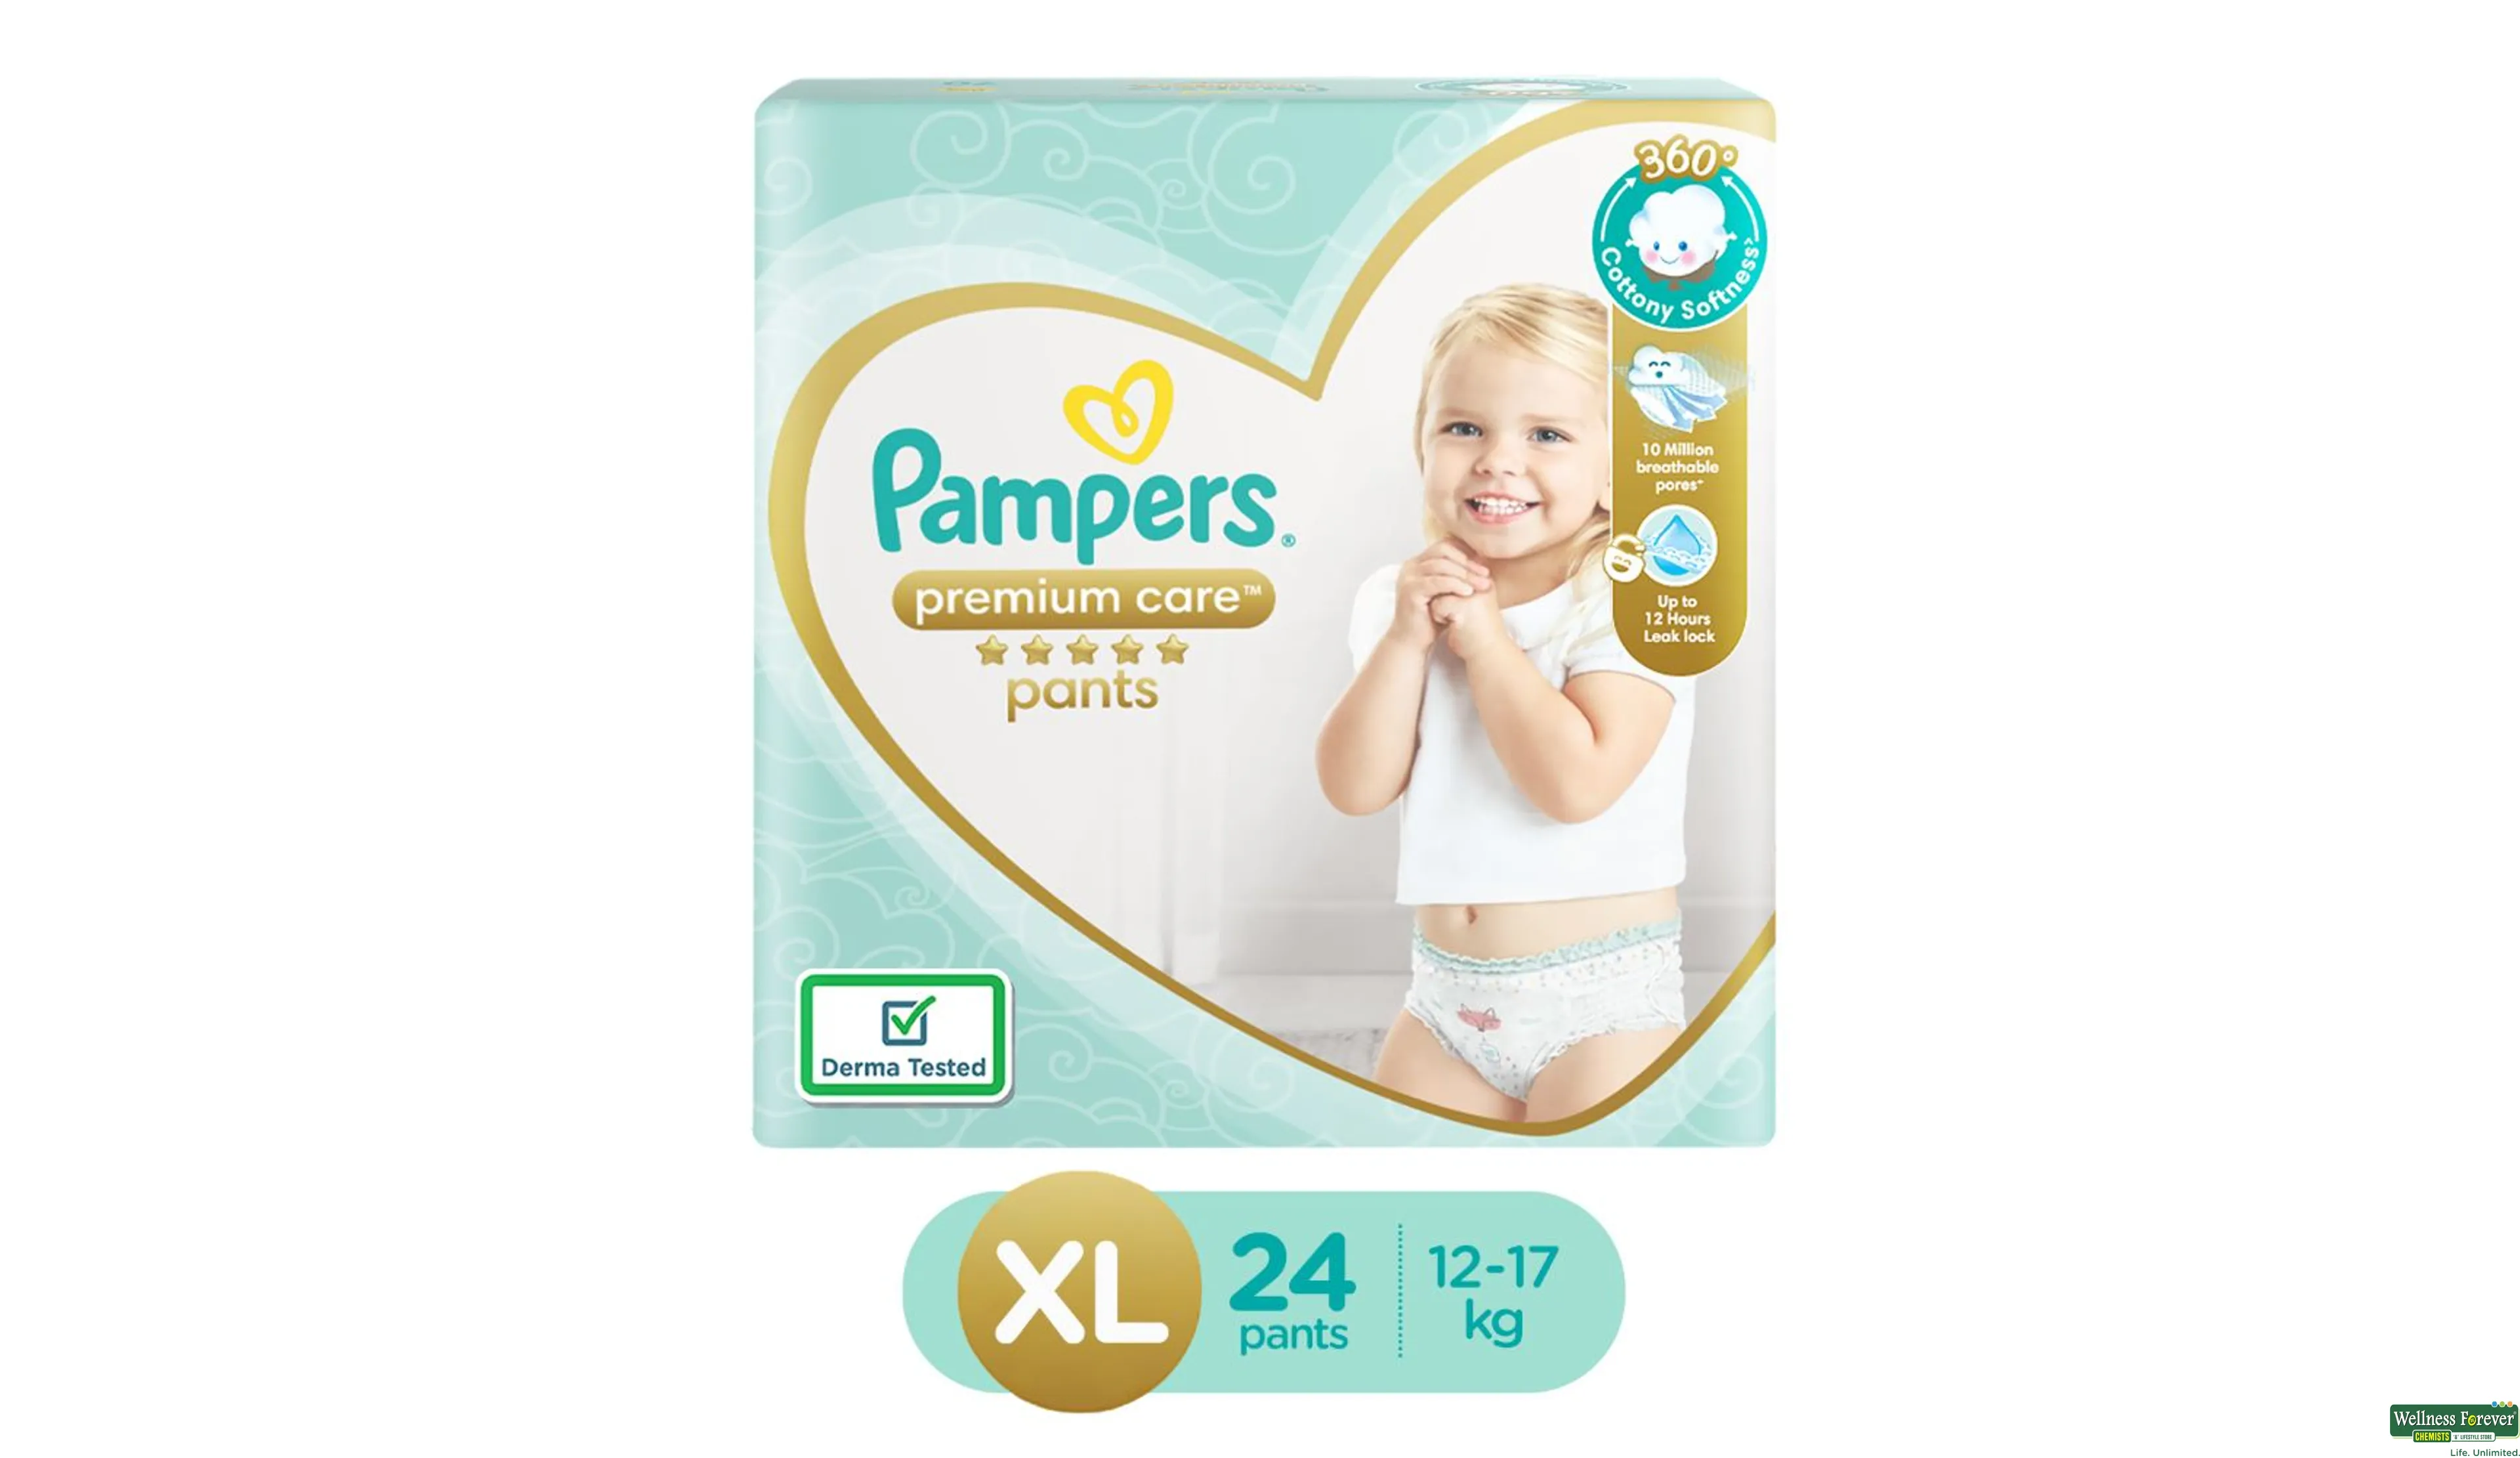 Buy PAMPERS DIAP PREMIUM CARE PANTS XL 24PC Online at Best Prices |  Wellness Forever